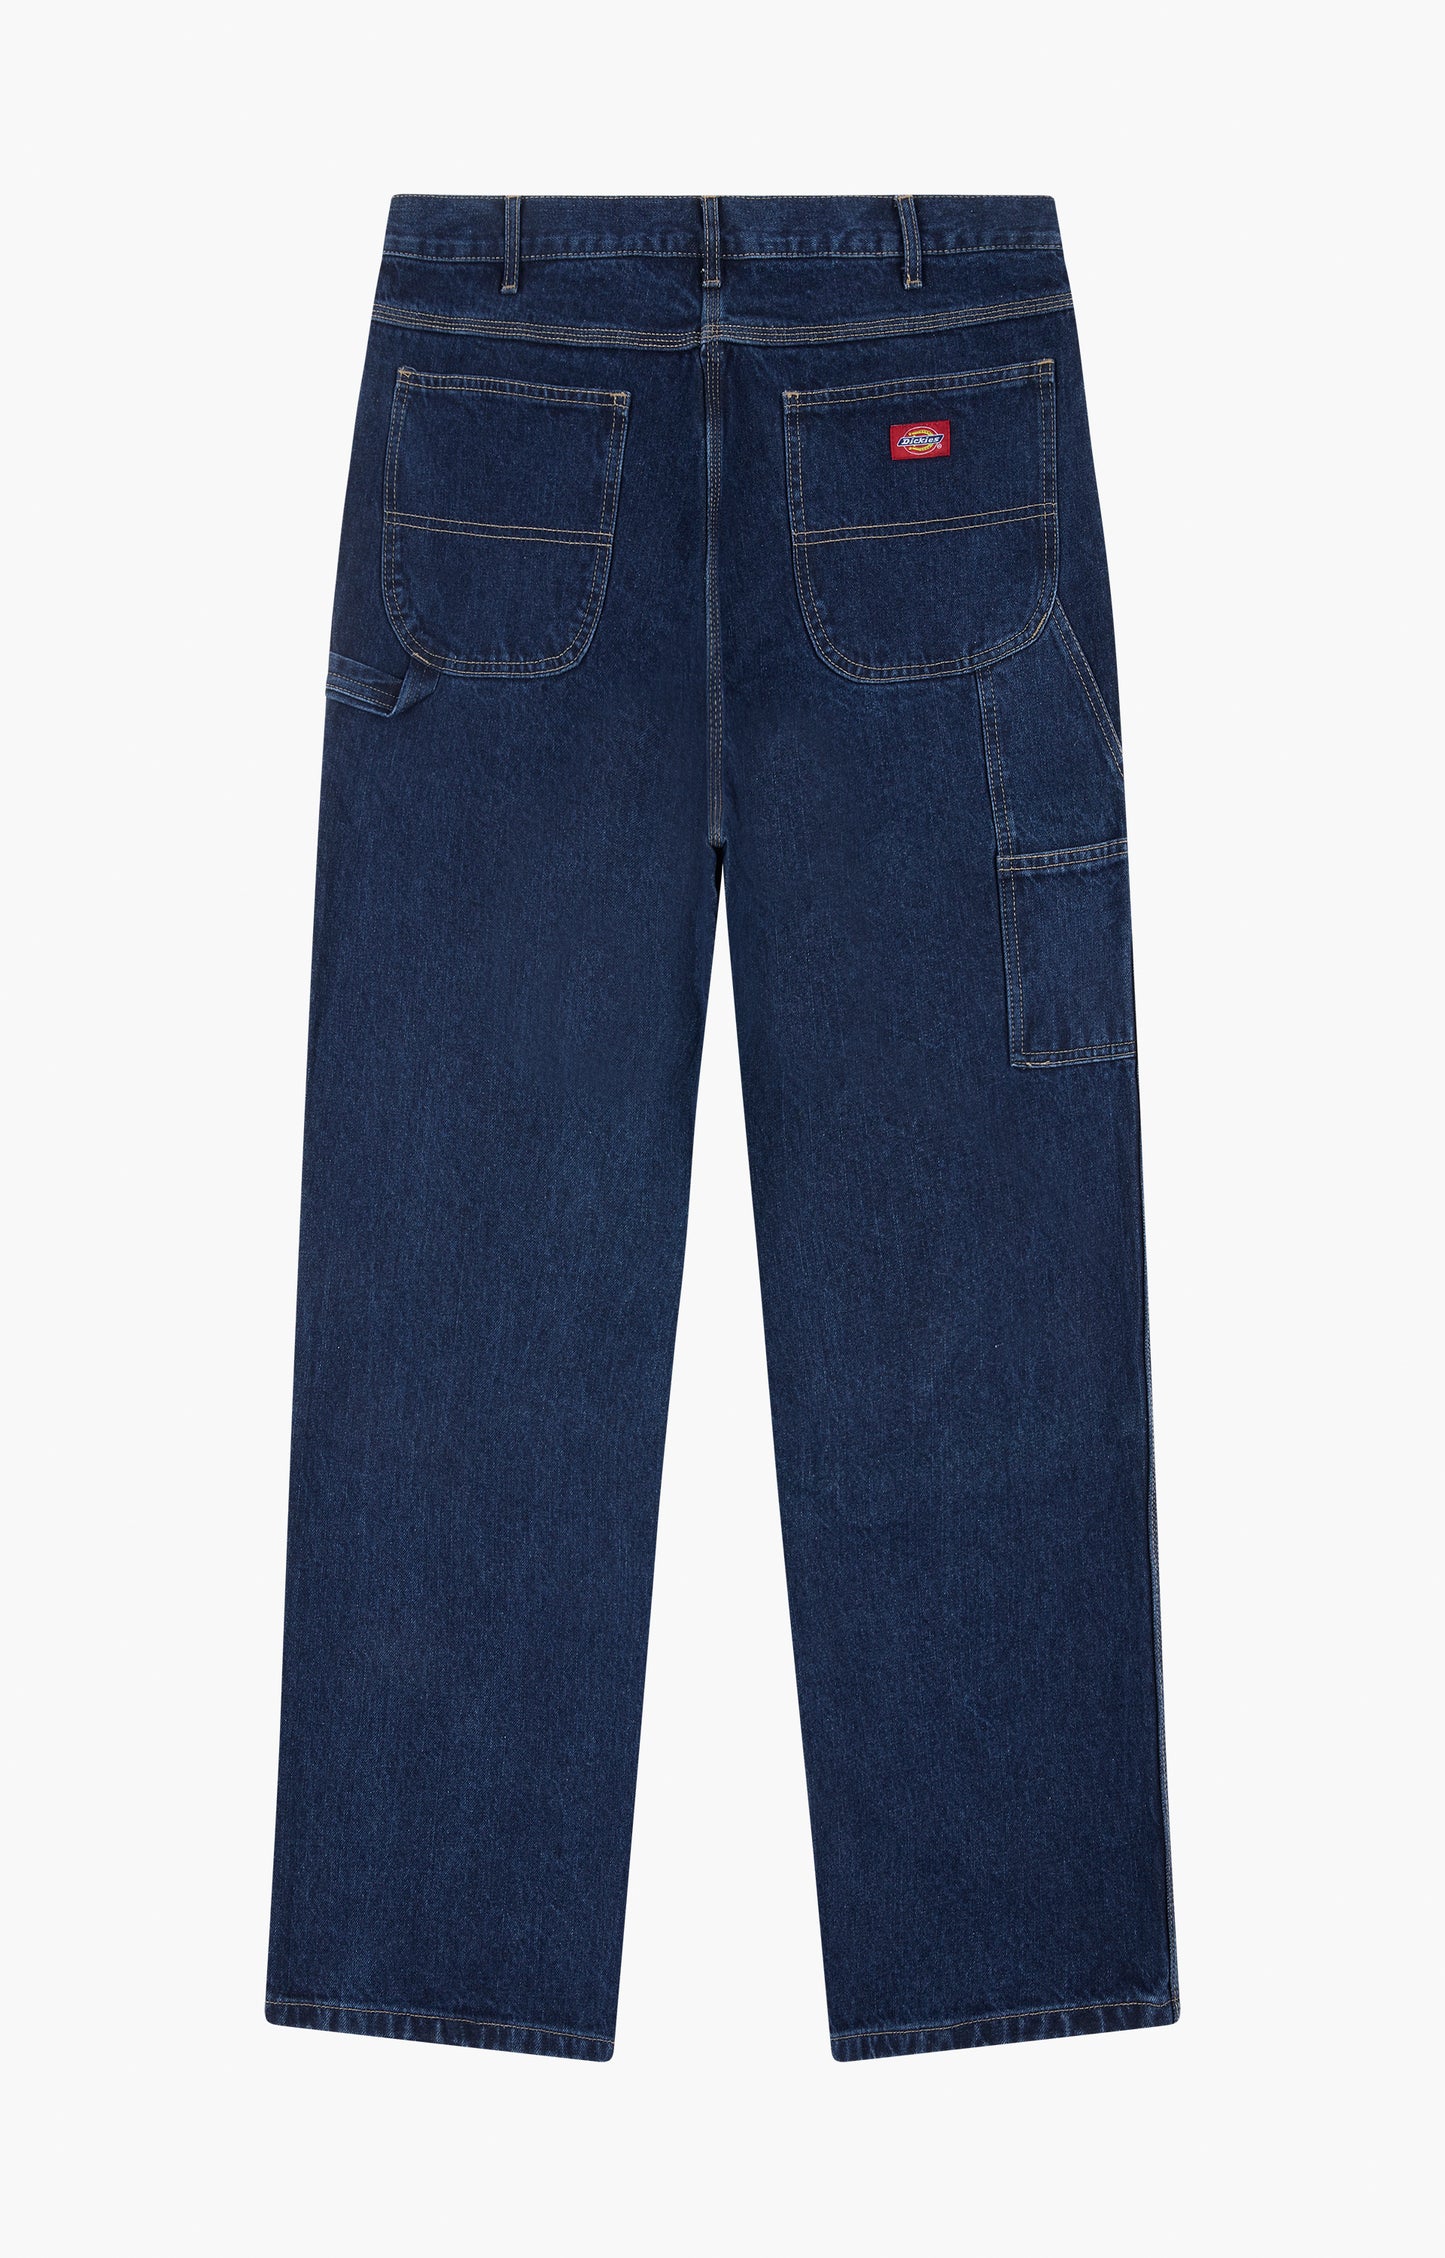 Dickies Relaxed Fit Jeans, Stone Washed Indigo